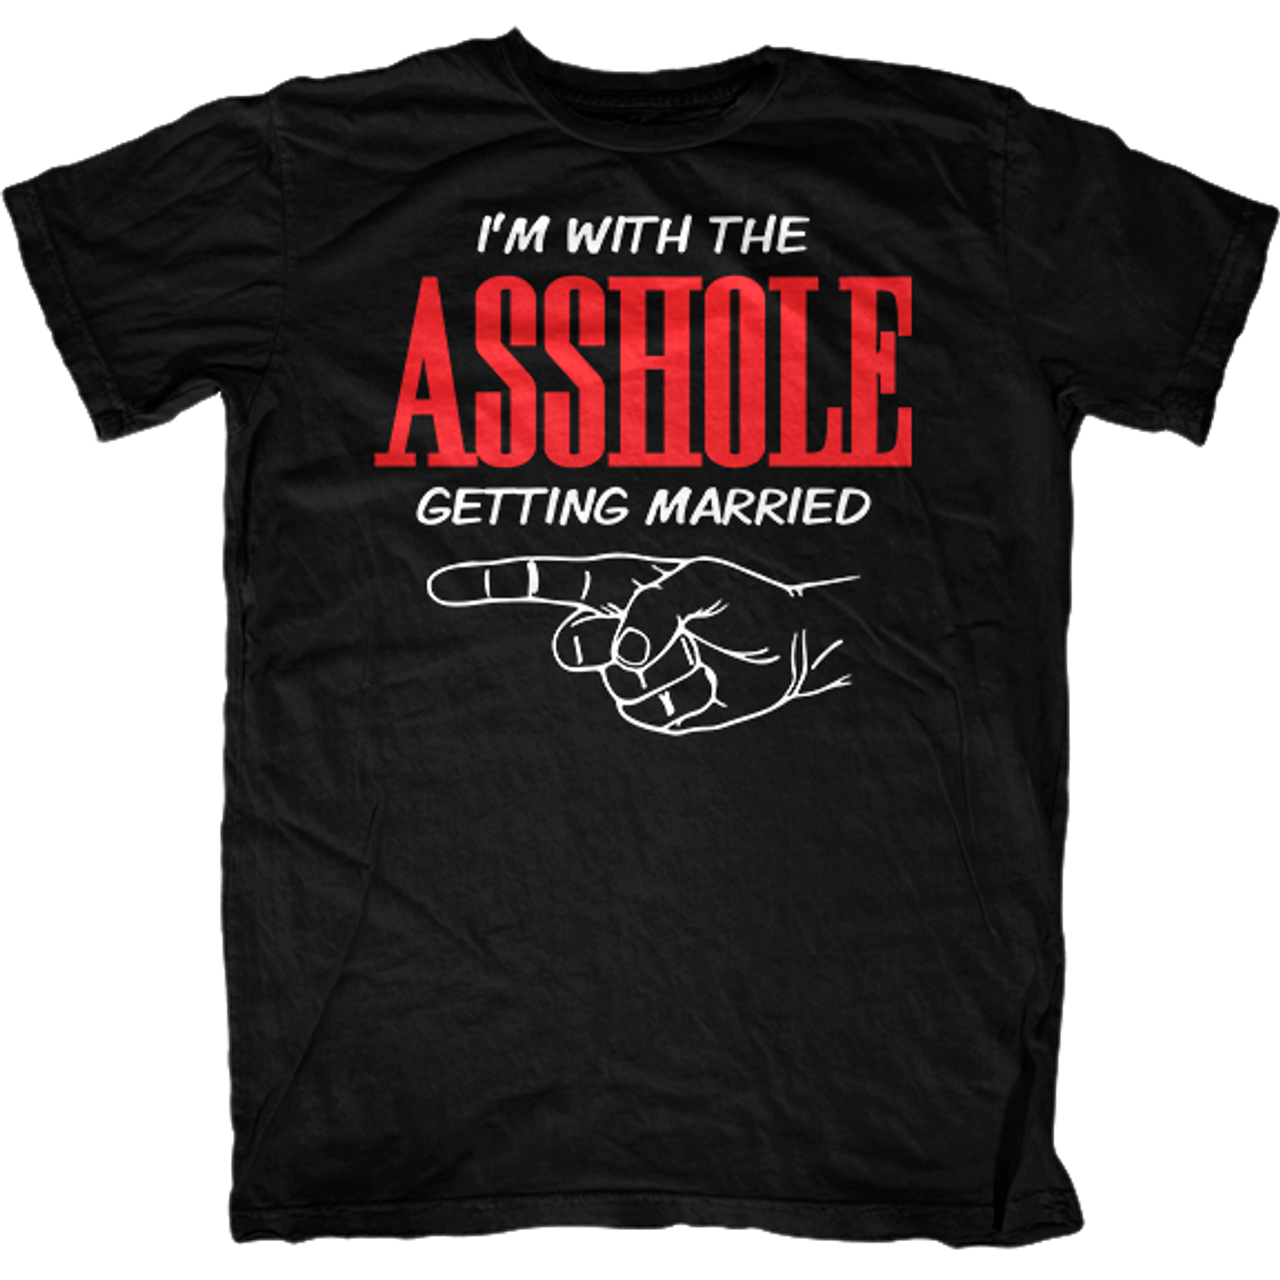 the Asshole getting Married T-Shirt